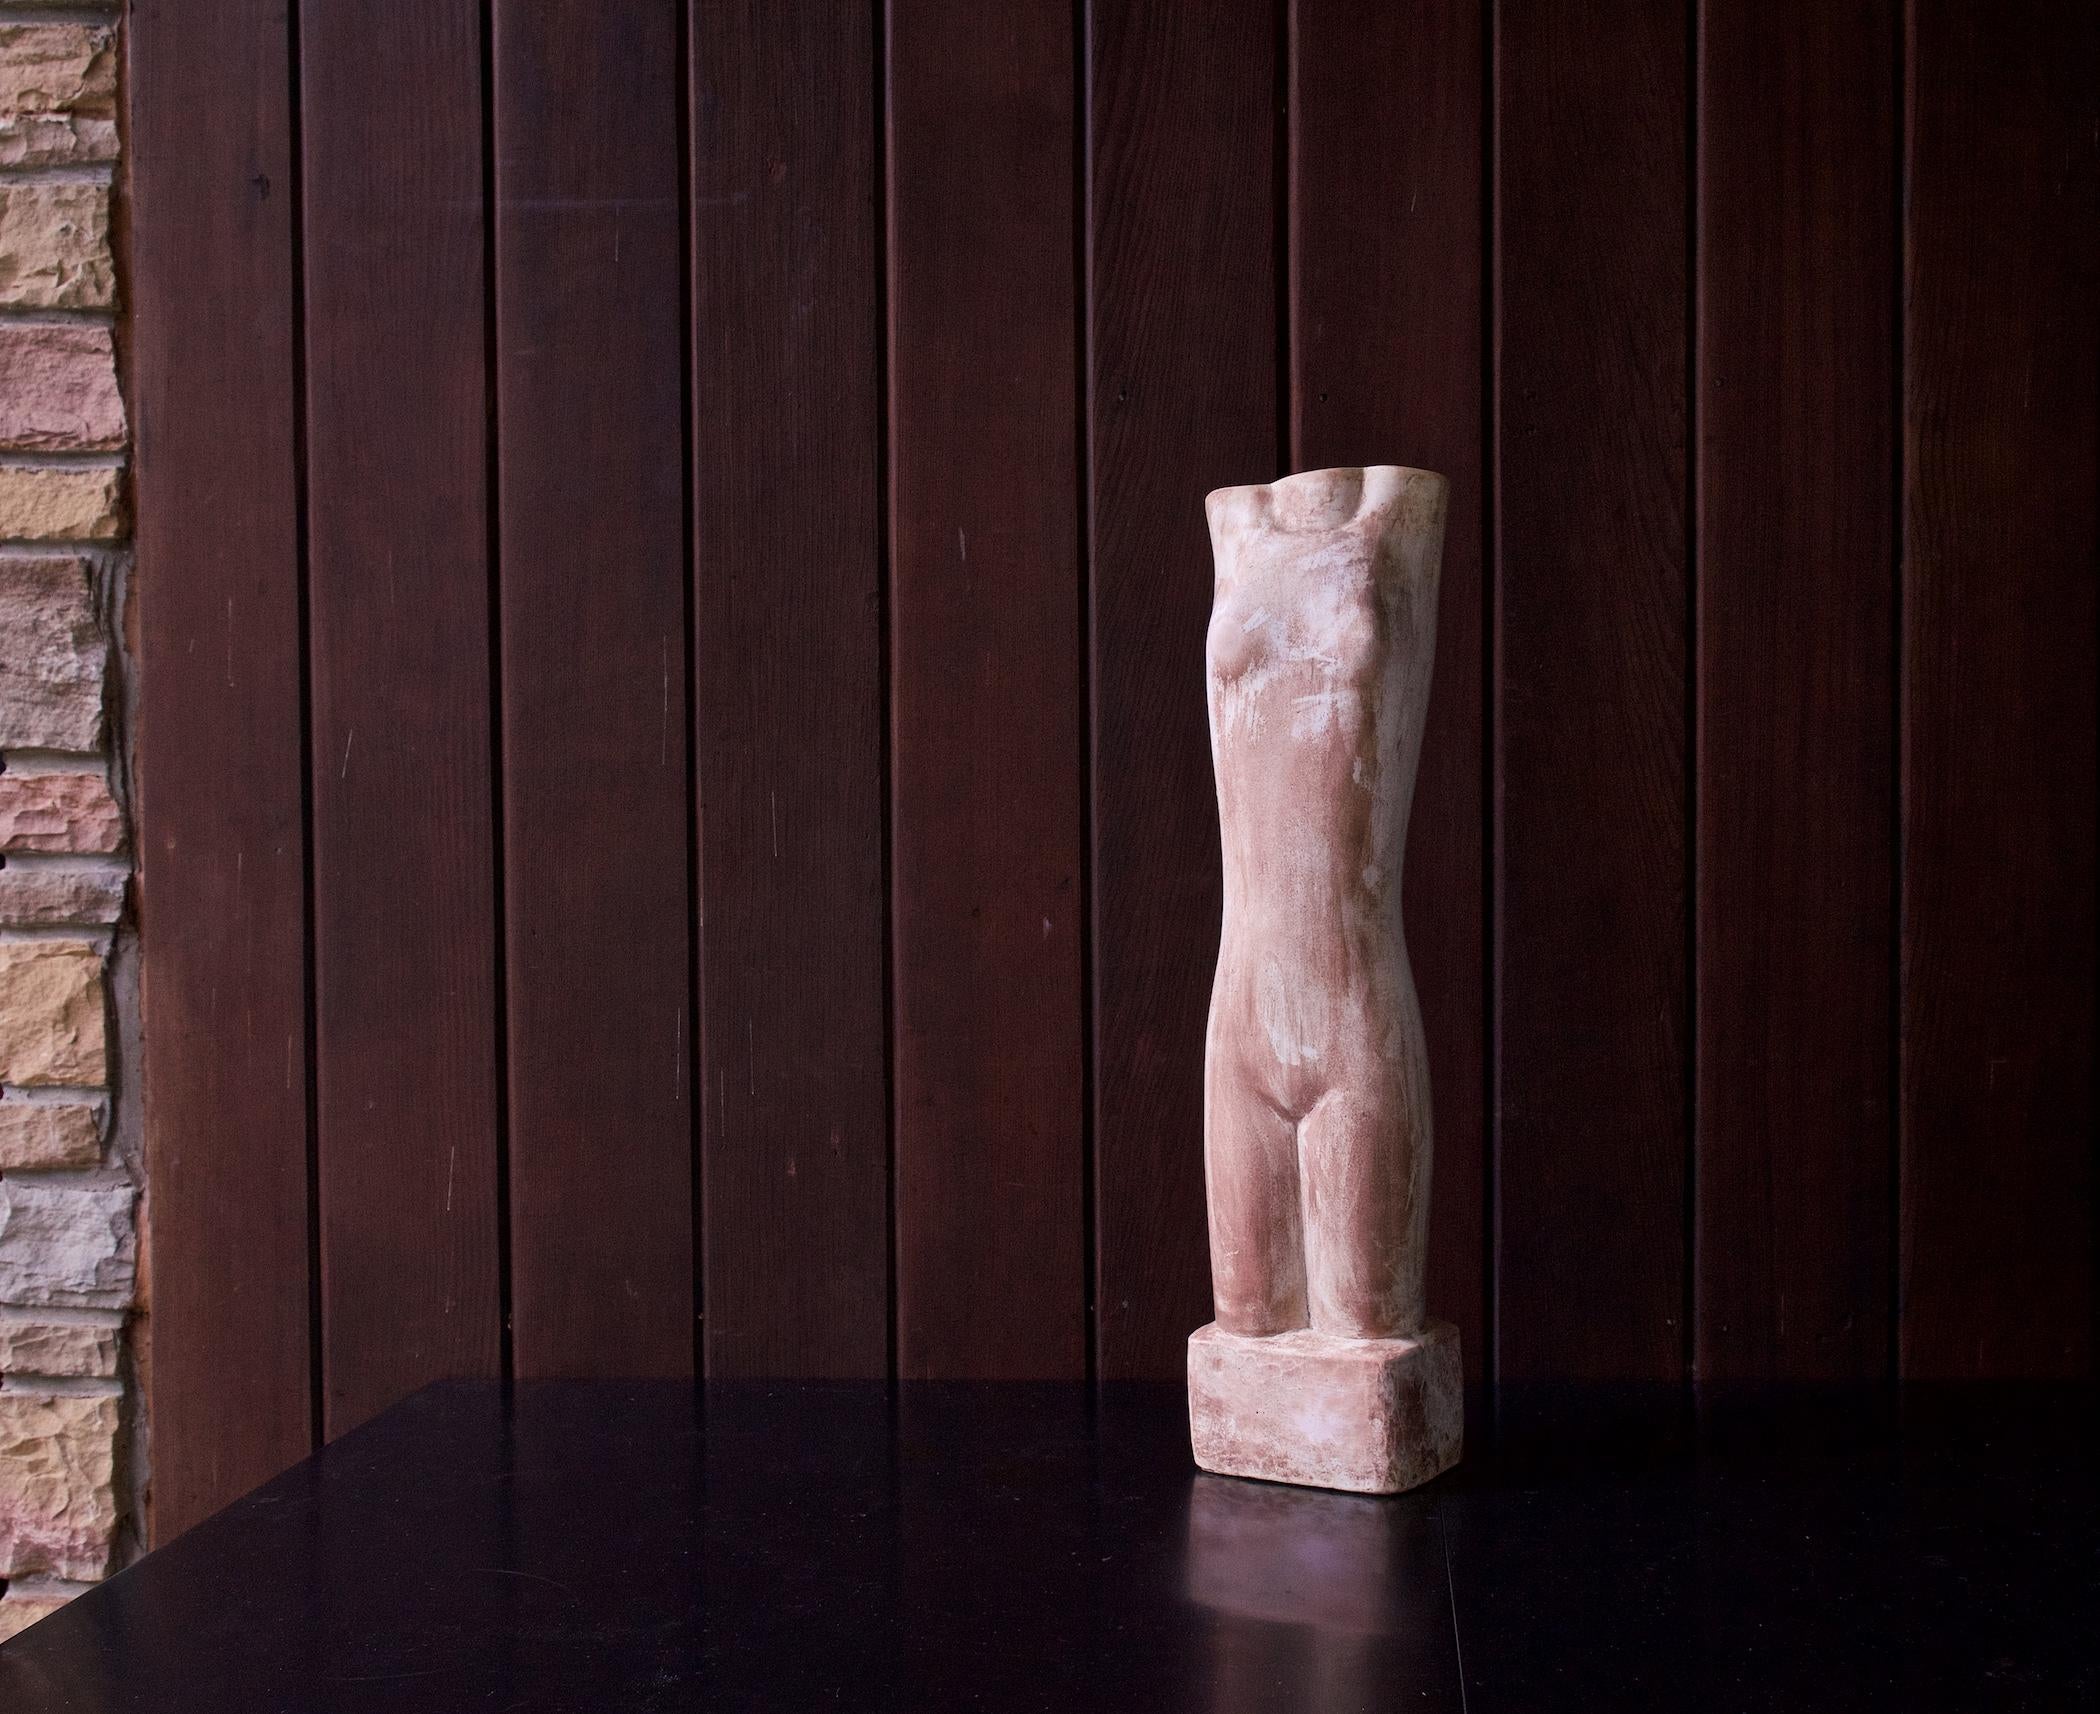 Extremely uncommon Cleo Hartwig slip-cast chalkware sculpture of the female body.  Very distressed finish. Signed in mold, C.HARTWIG

Measures: W 5½ x D 5½ x H 23 in.

